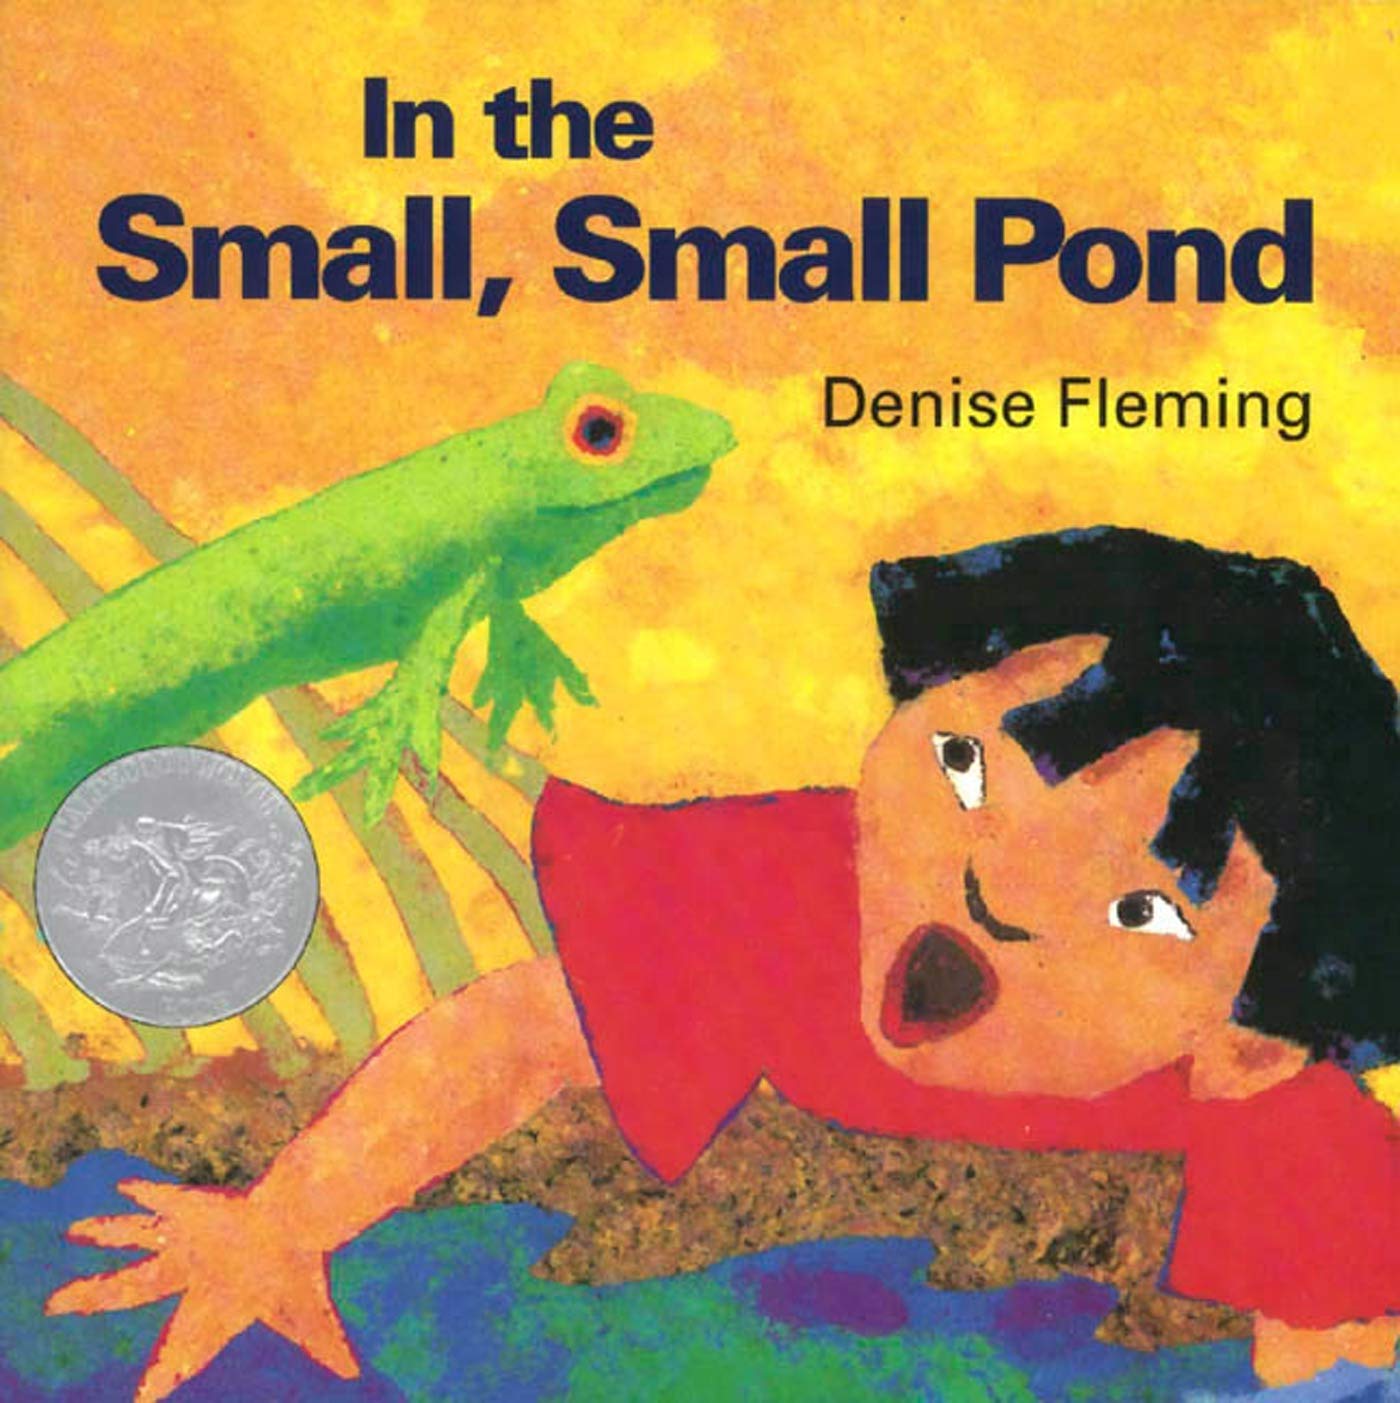 Image of the book cover "In the Small, Small Pond" by Denis FLeming. A boy is surprised by a jumping green frog.